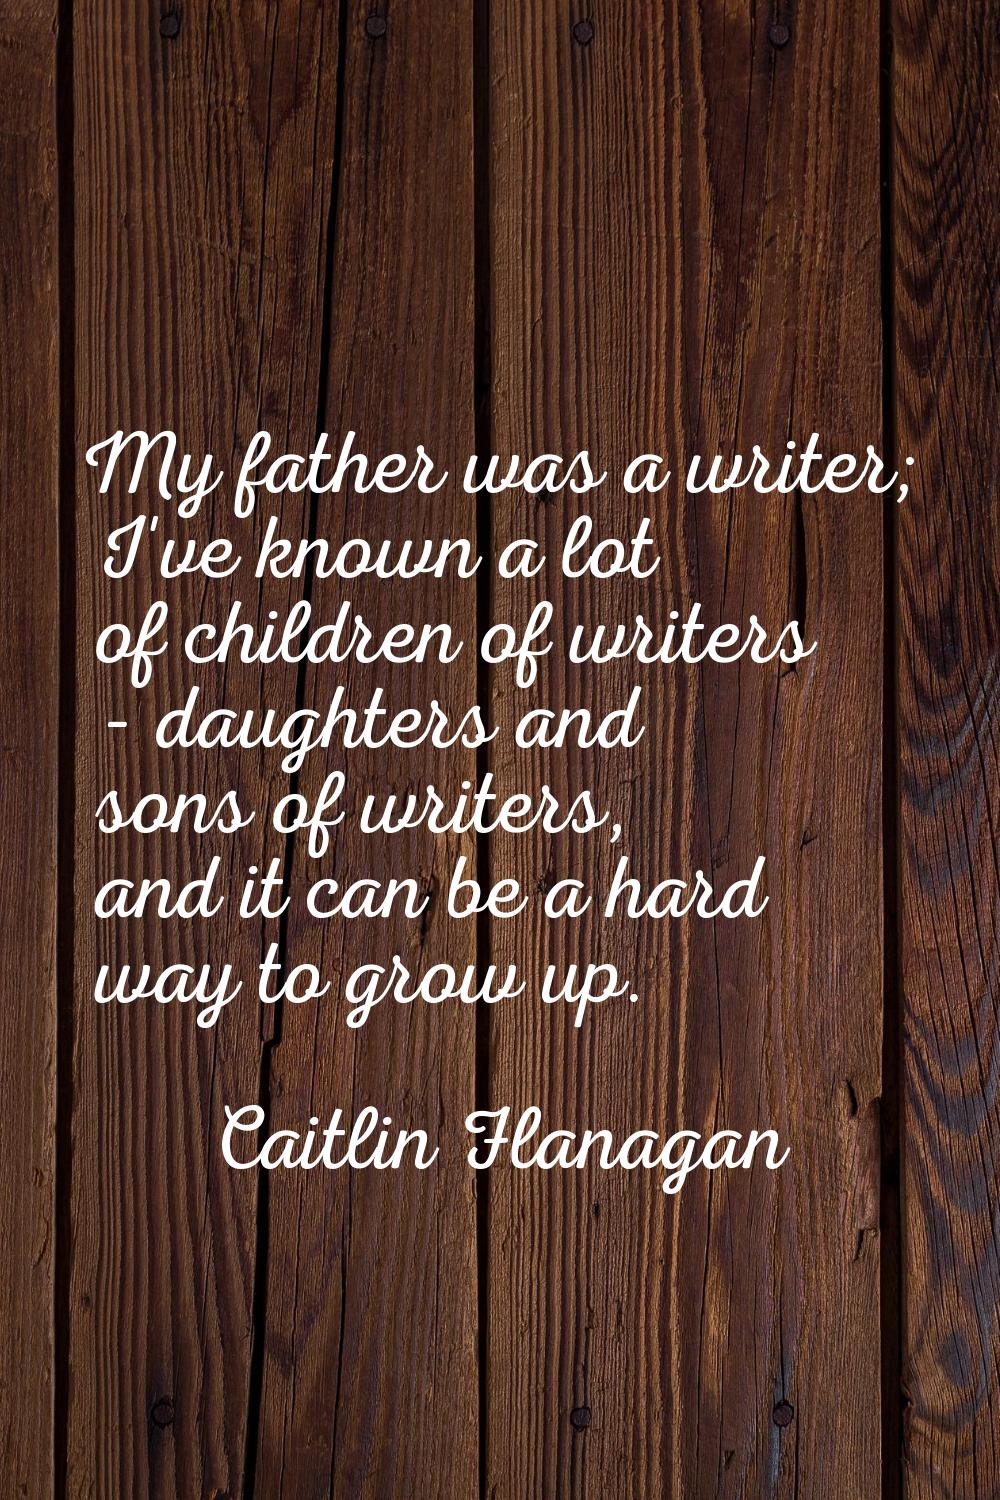 My father was a writer; I've known a lot of children of writers - daughters and sons of writers, an